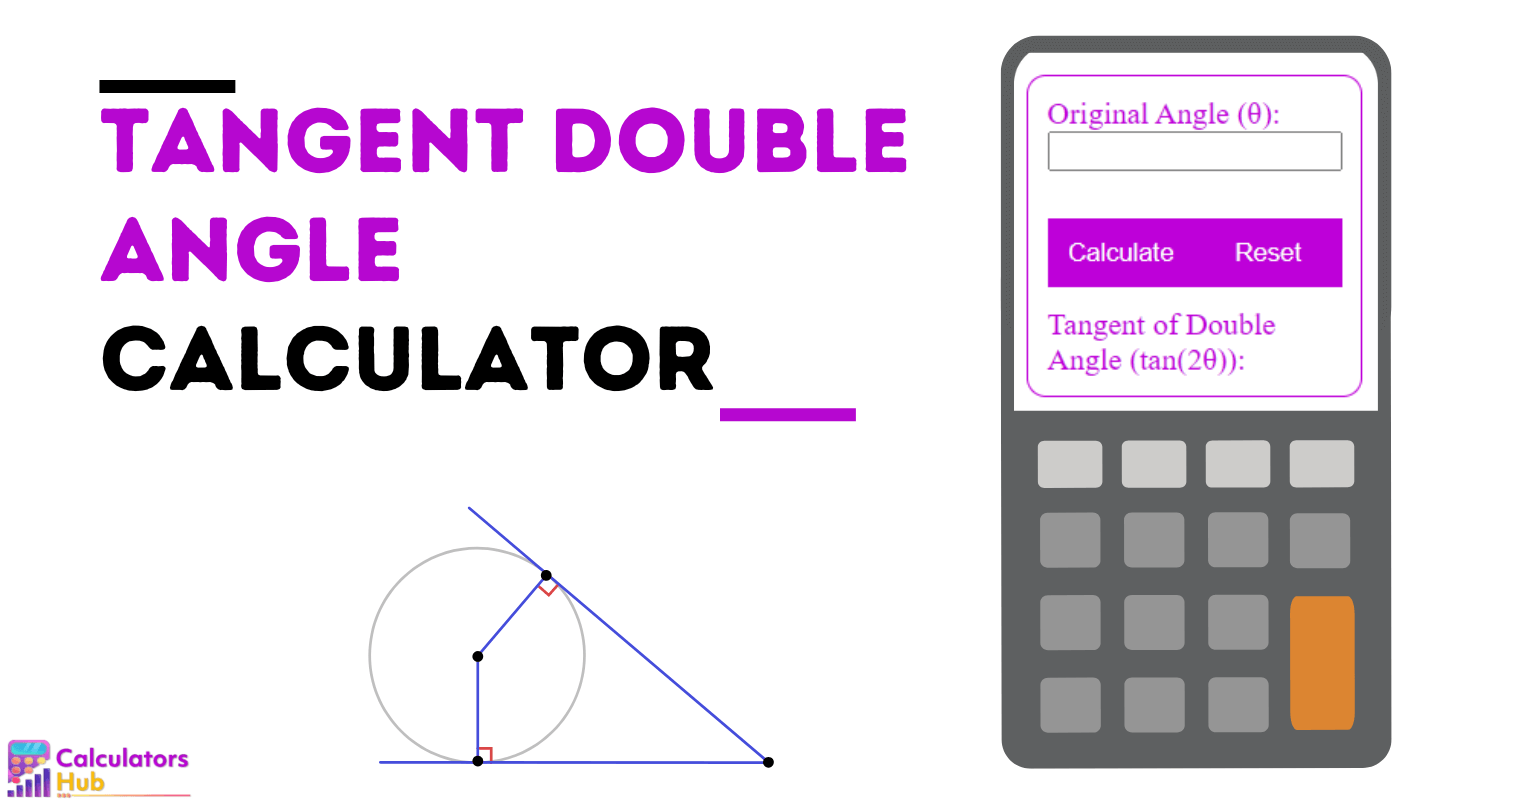 Tangent Double Angle Calculator